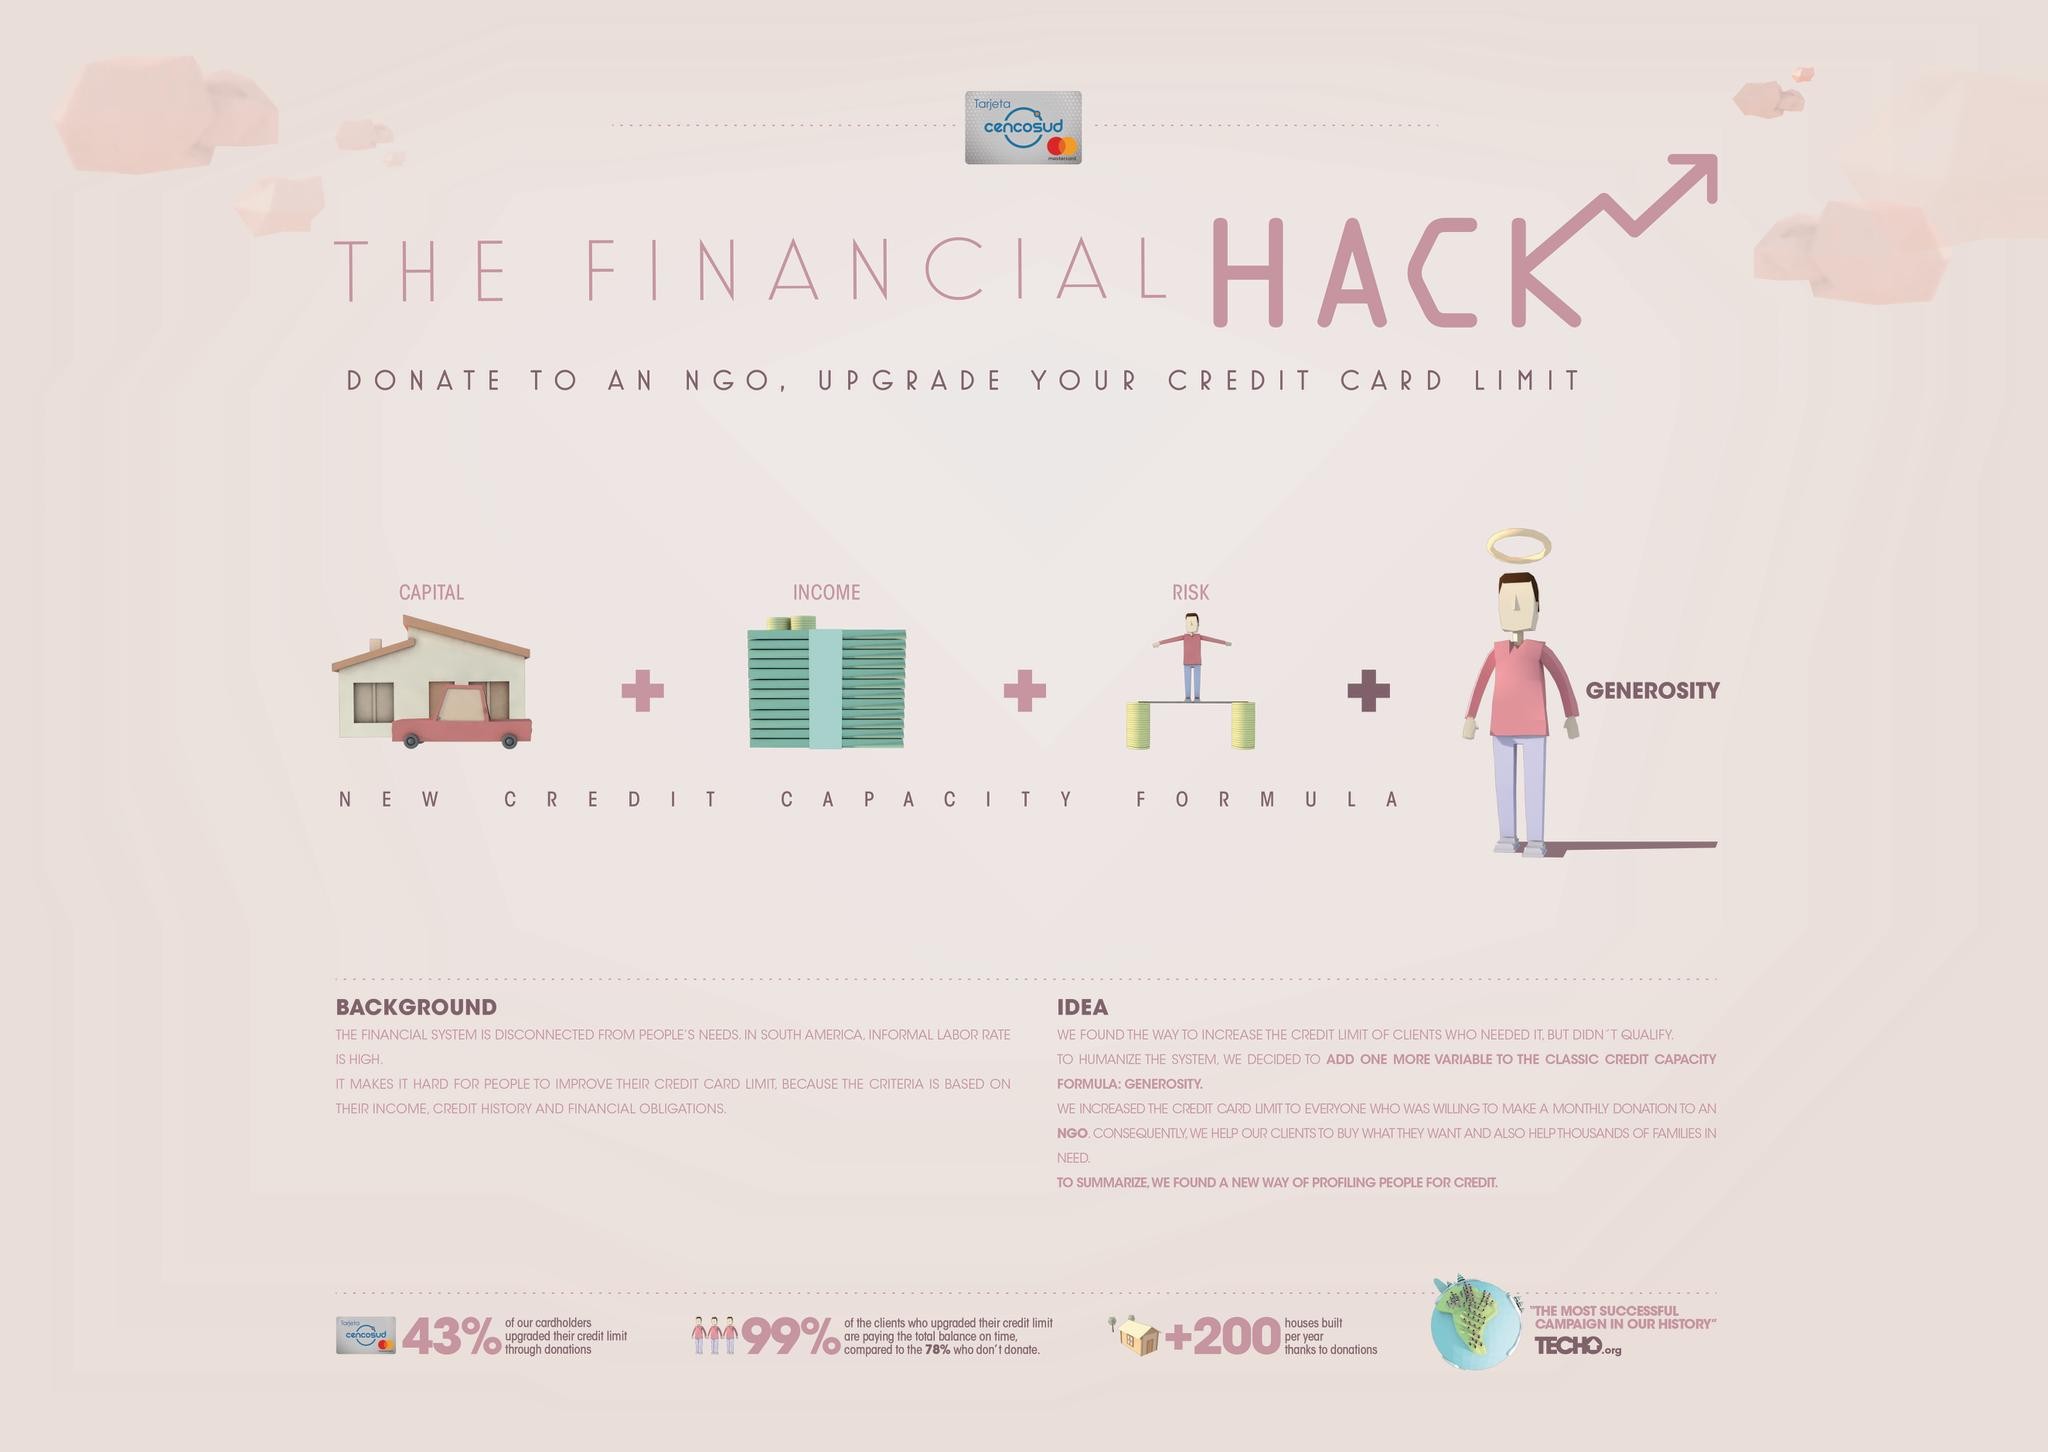 THE FINANCIAL HACK